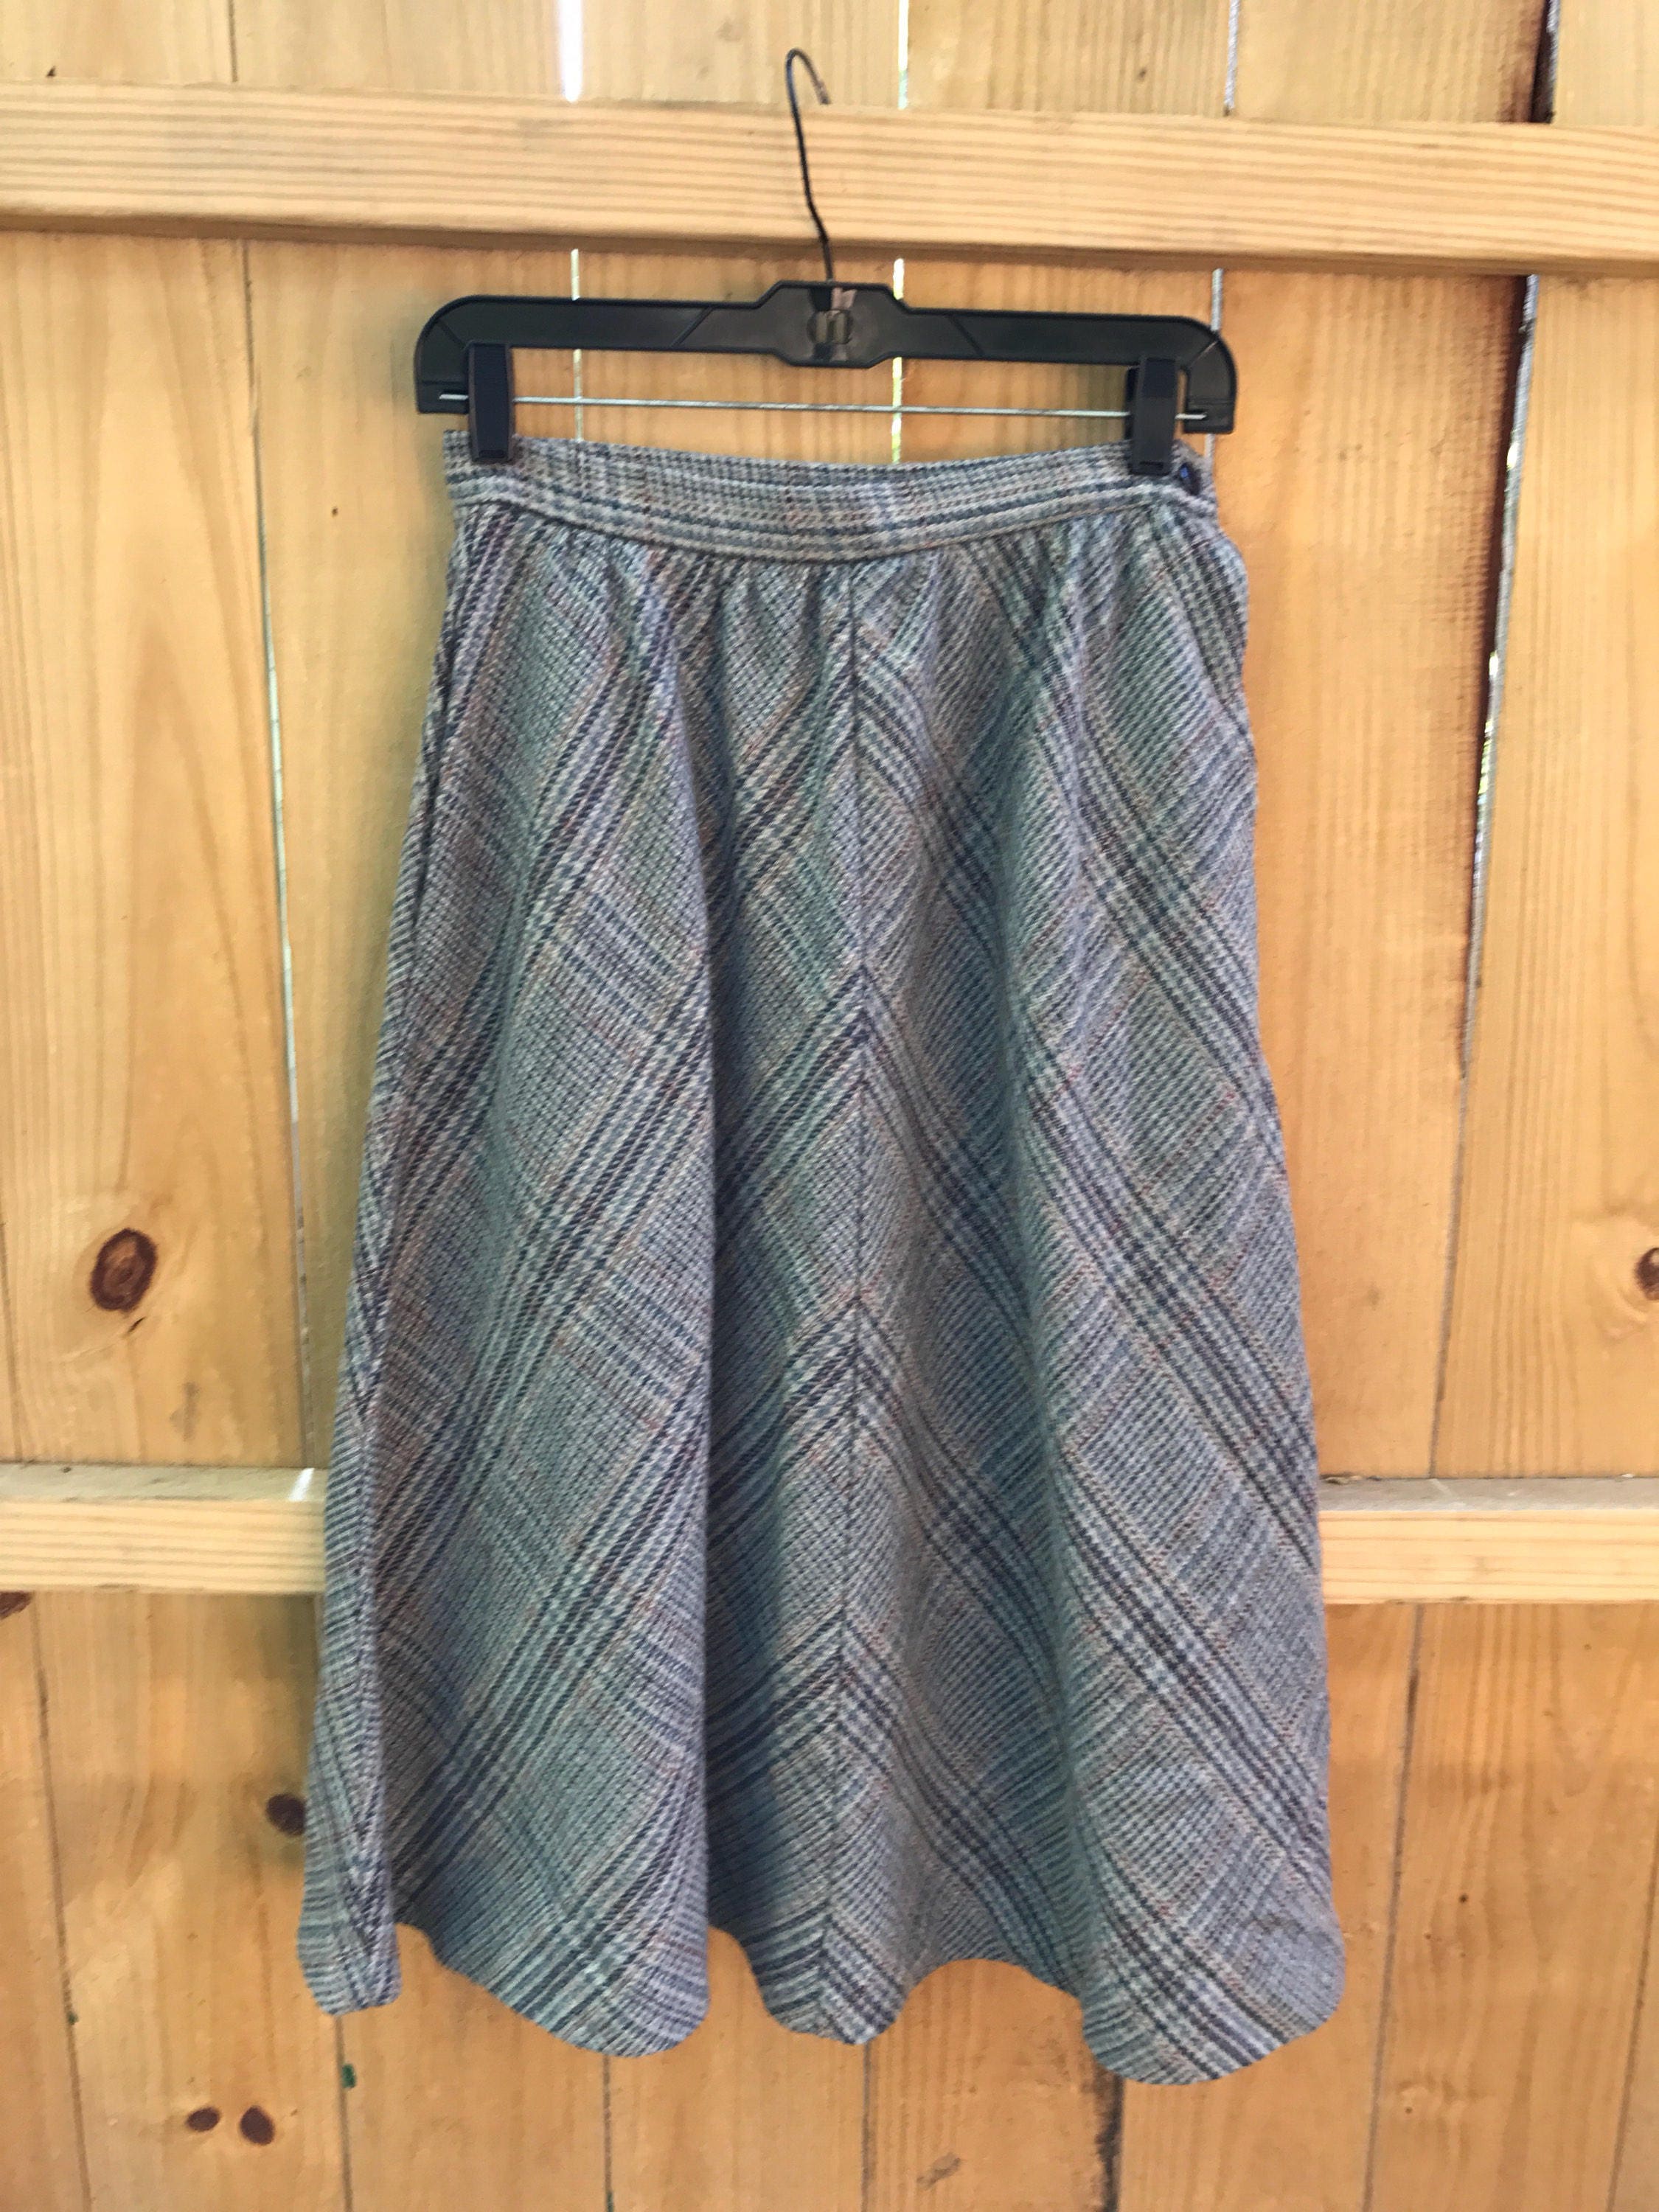 MG Concepts 70s High Waisted Full Wool Plaid Skirt Size 9/10 | Etsy